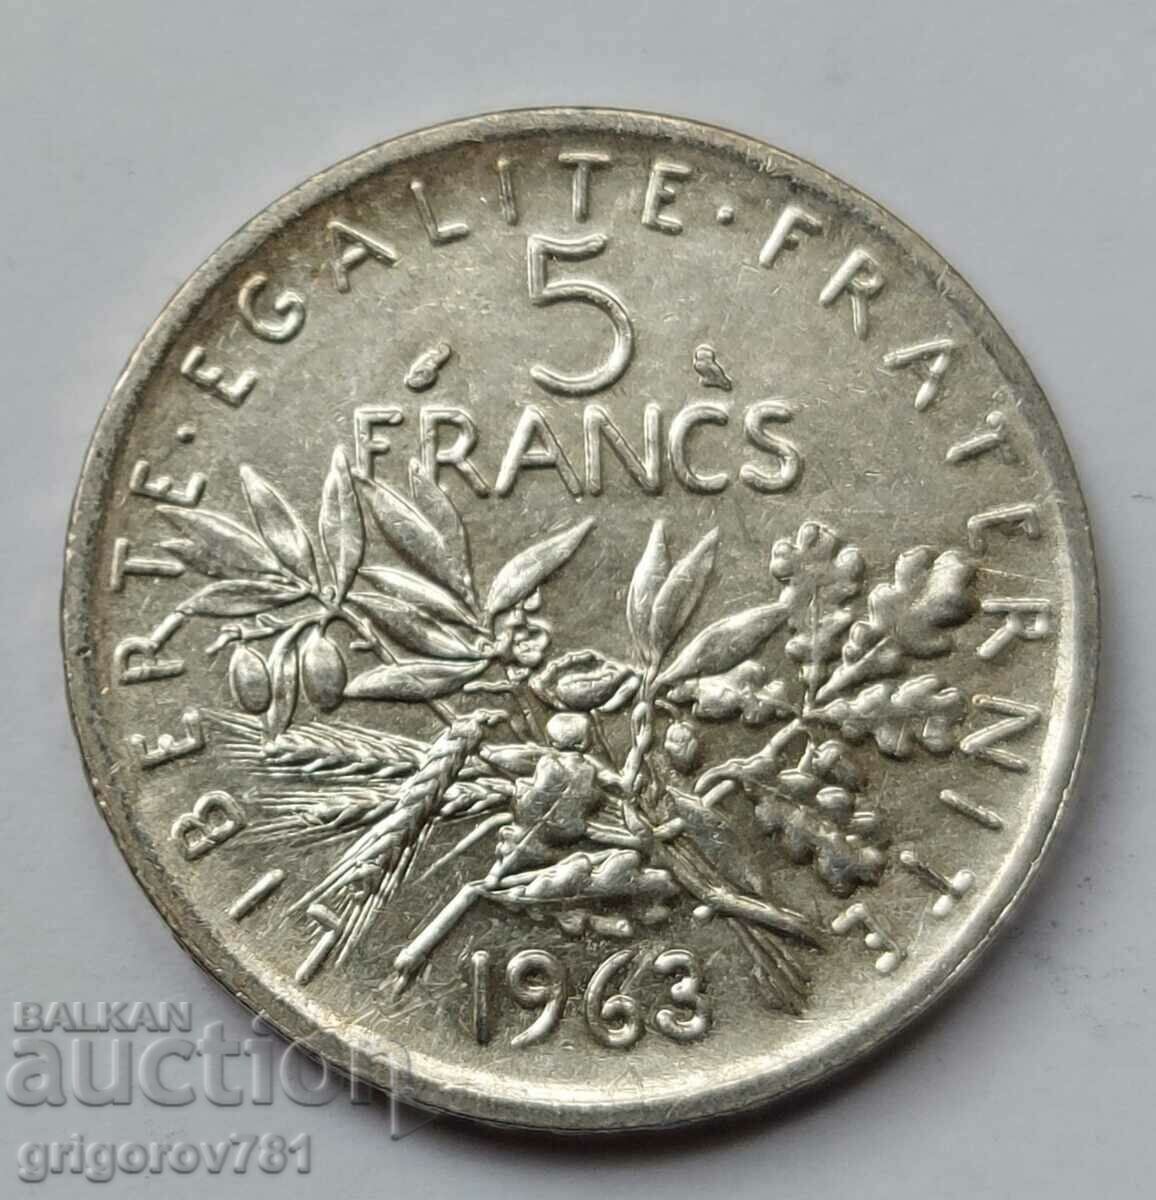 5 Francs Silver France 1963 - Silver Coin #6